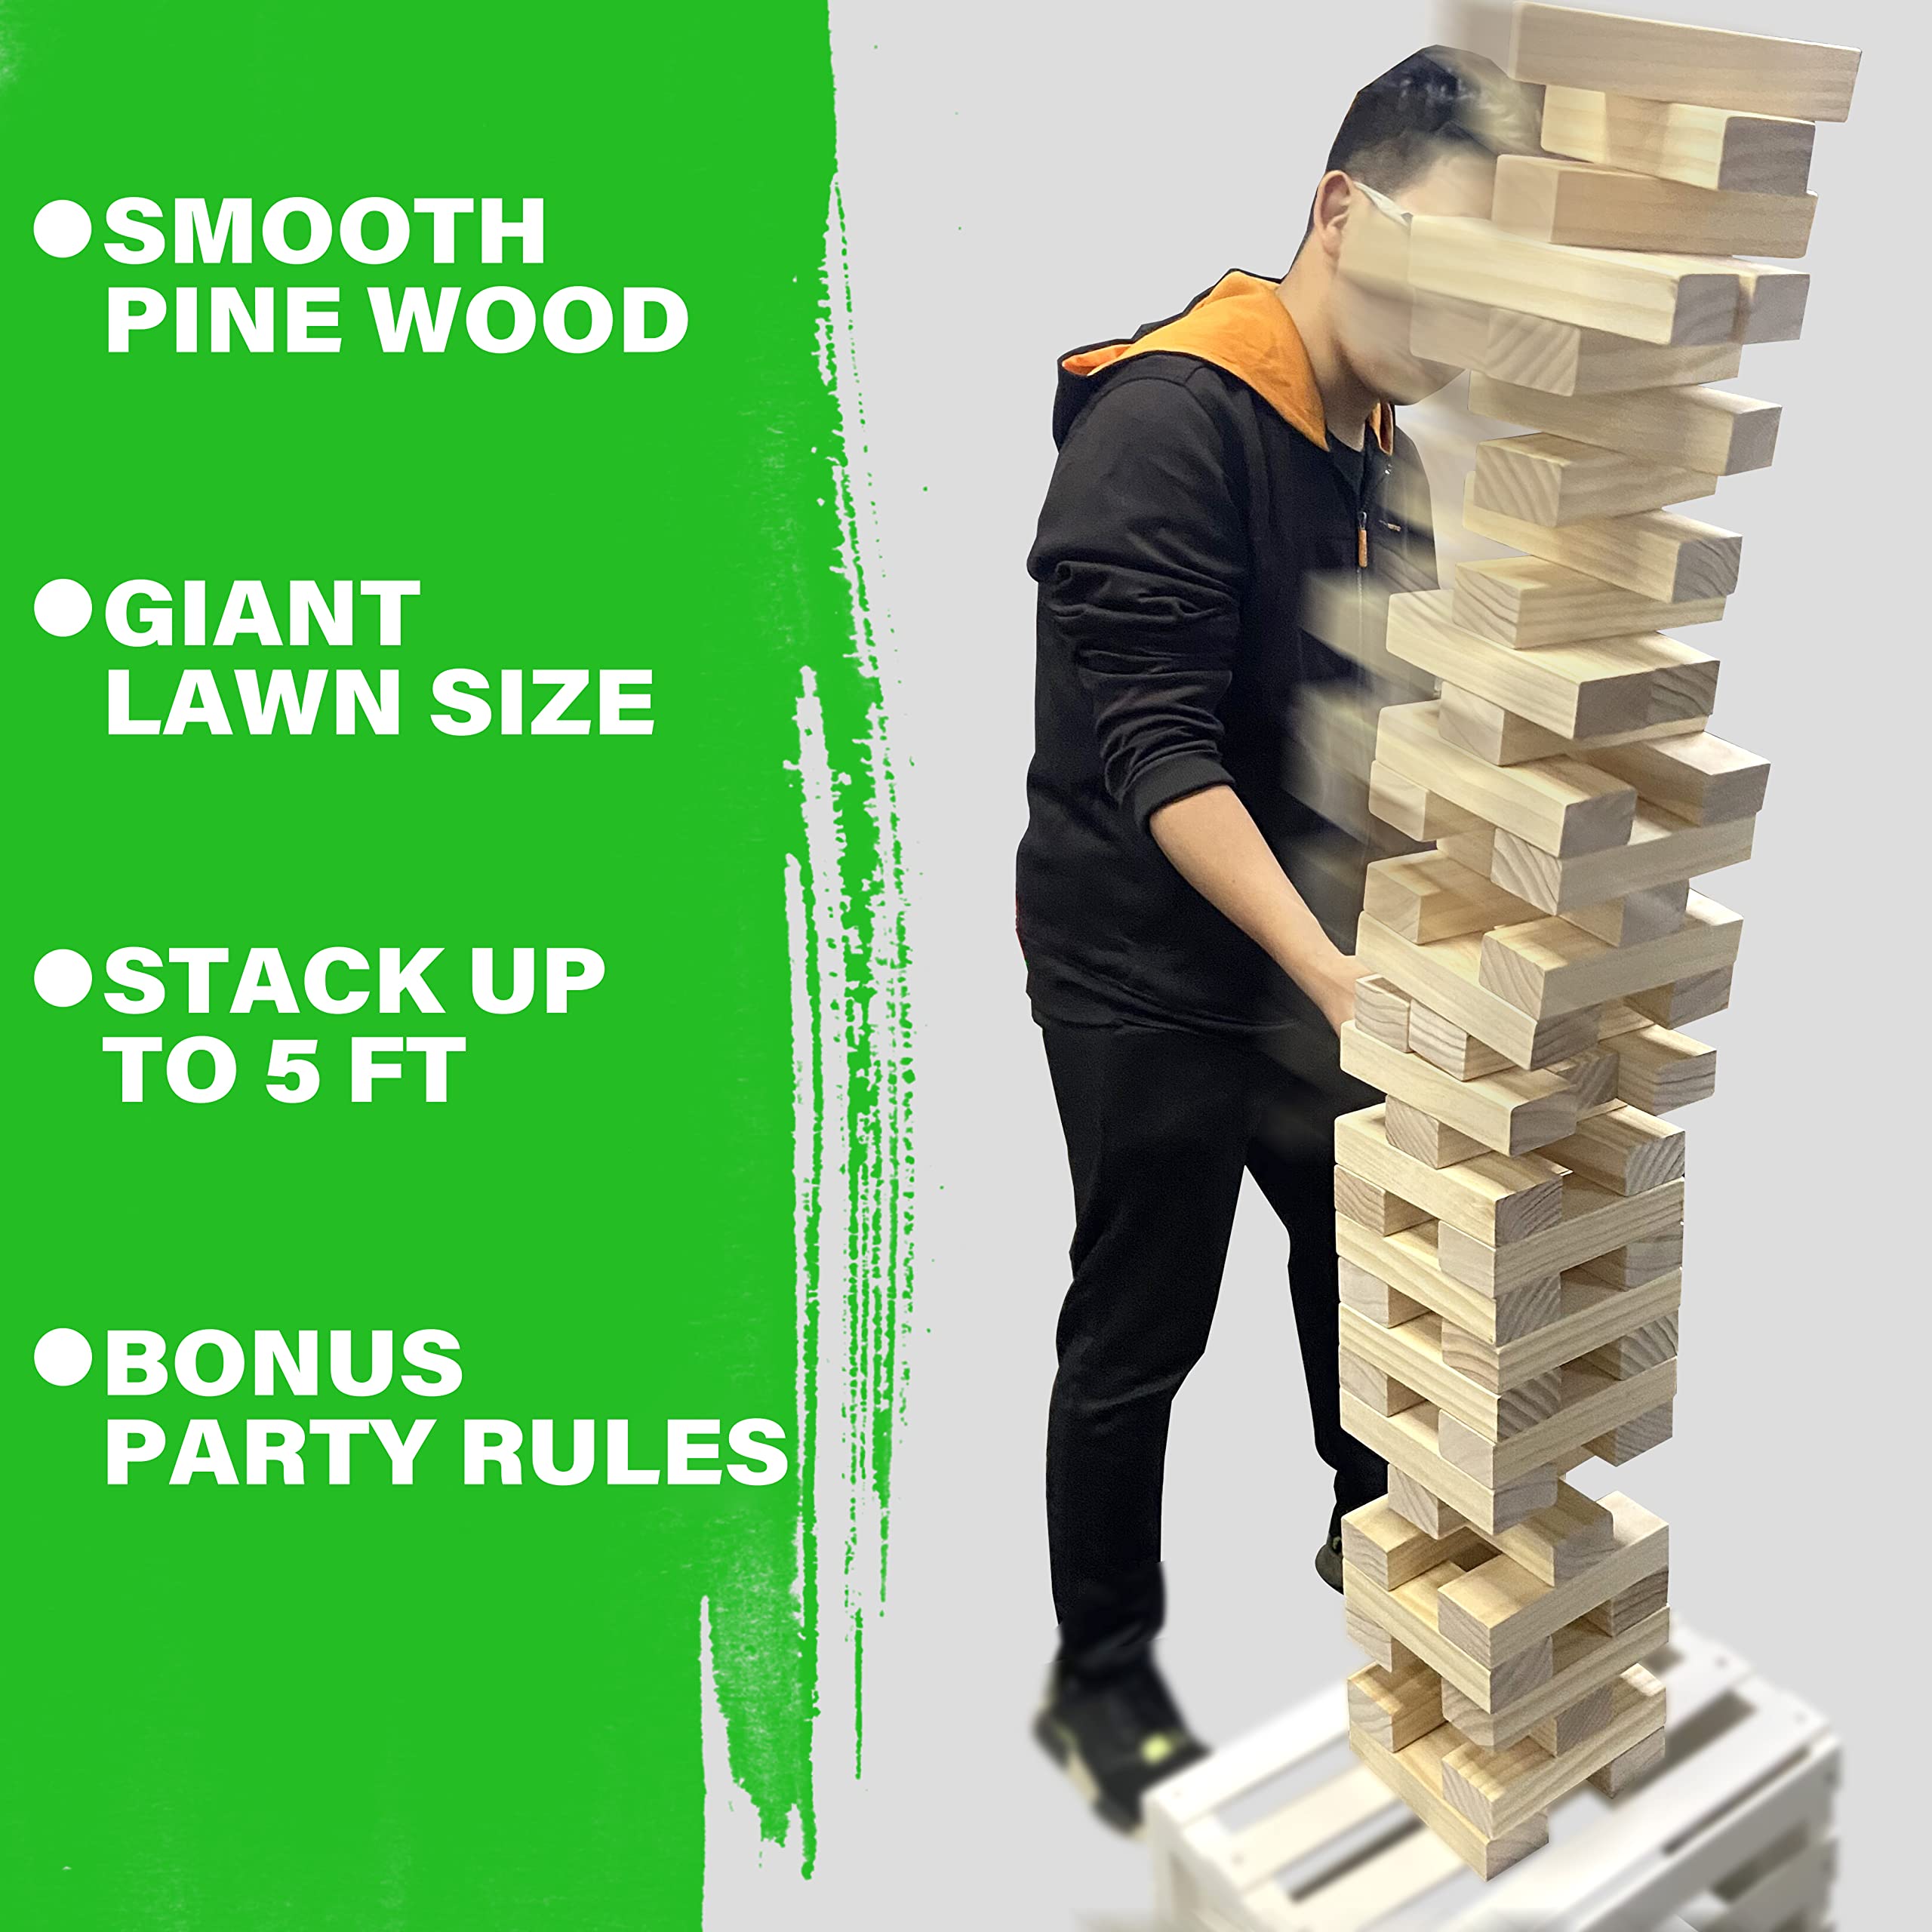 SPORT BEATS Giant Tower Game Life Size Wooden Stacking Games Lawn Outdoor Games for Adults and Family - Includes Rules and Carry Bag-54 Large Blocks